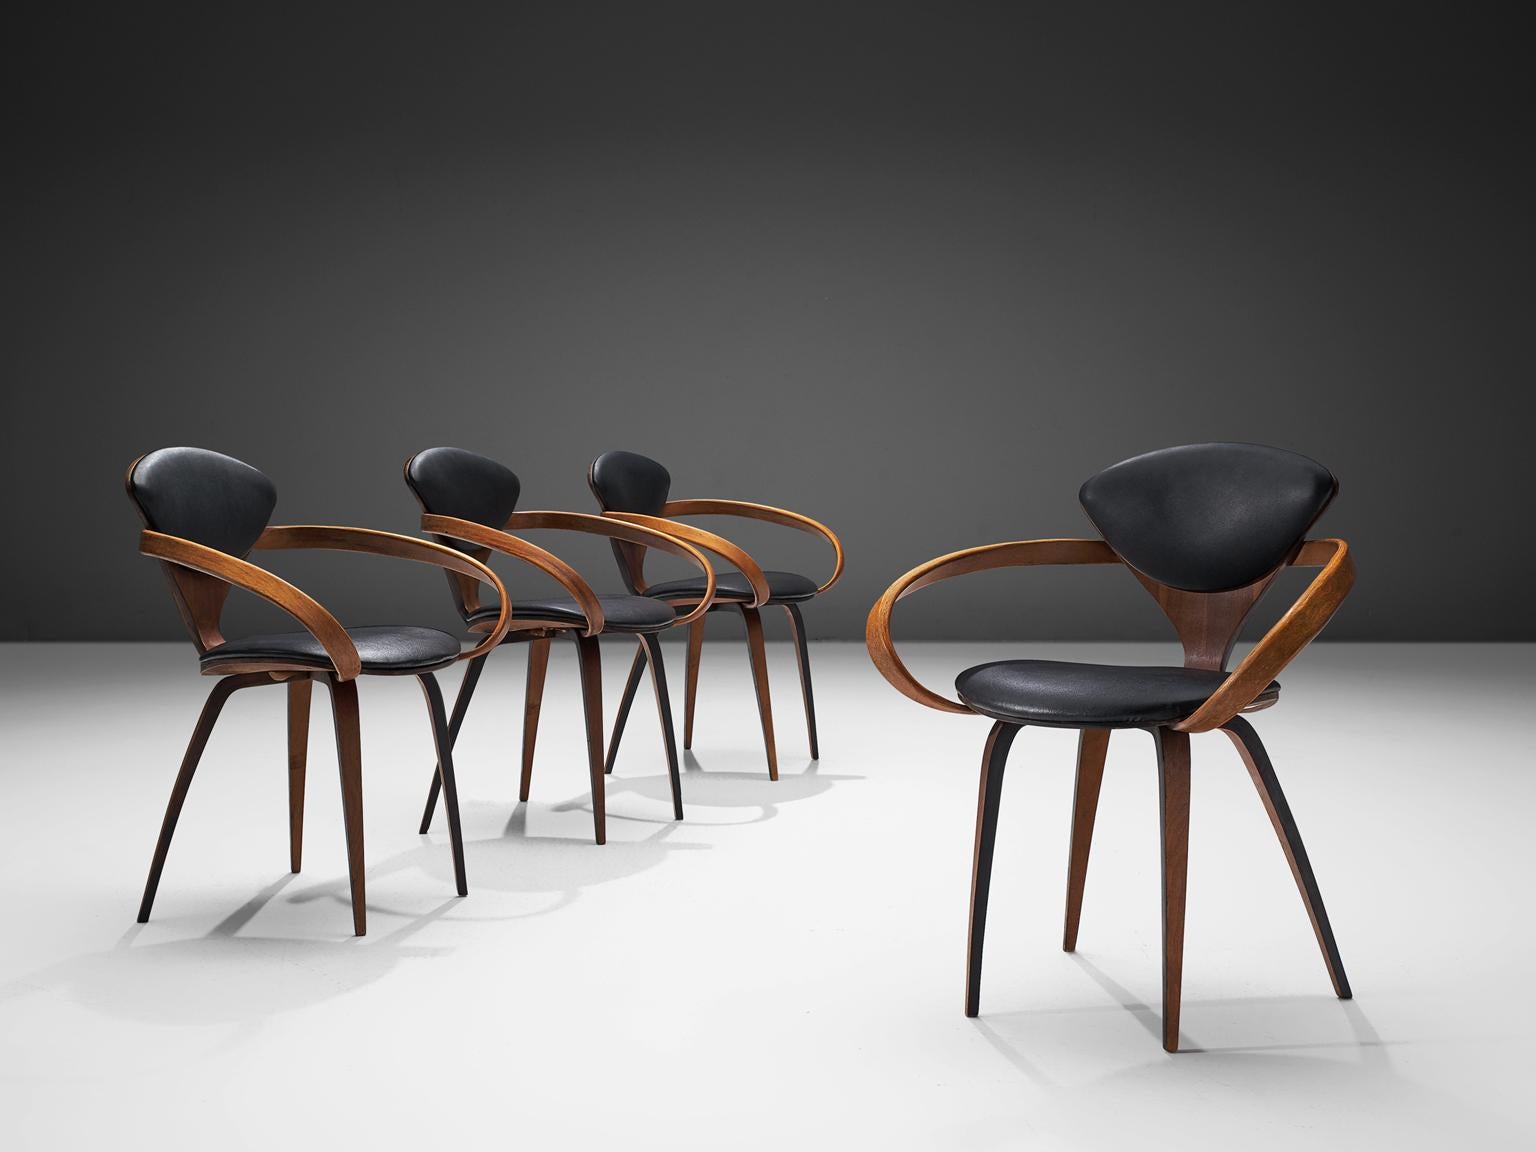 Norman Cherner for Plycraft, set of four dining chairs, walnut plywood and black leather, United States, design 1957, production 1965.

These four Classic Norman Cherner plywood chairs date from 1965. Their iconic shape resembles something like a